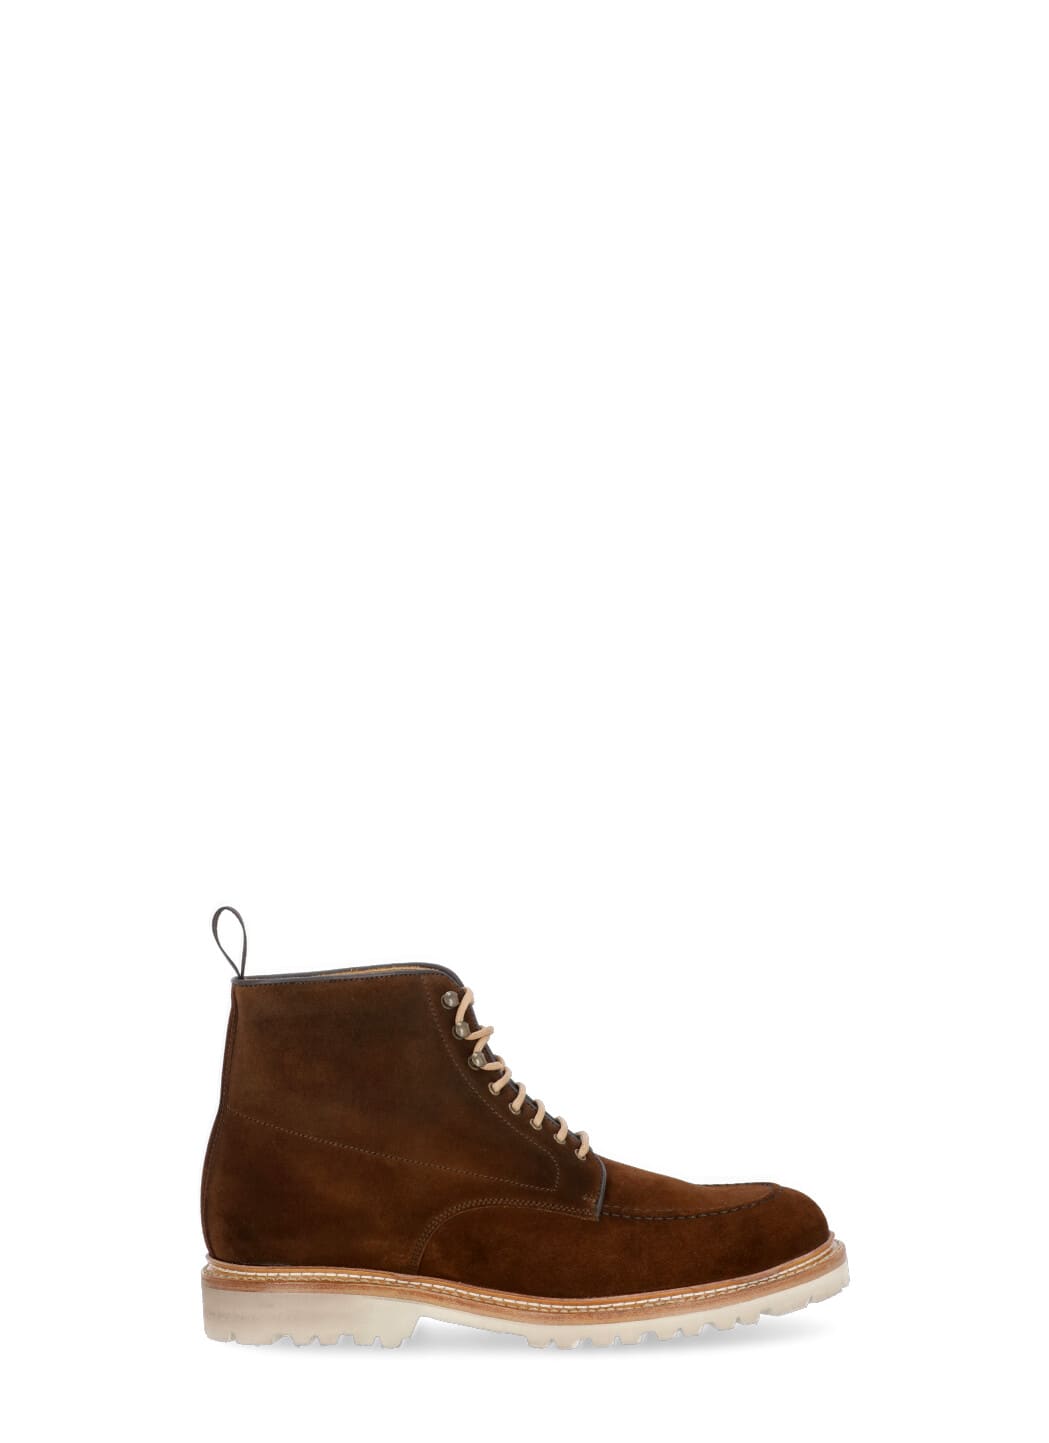 Berwick 1707 Suede Leather Ankle Boots